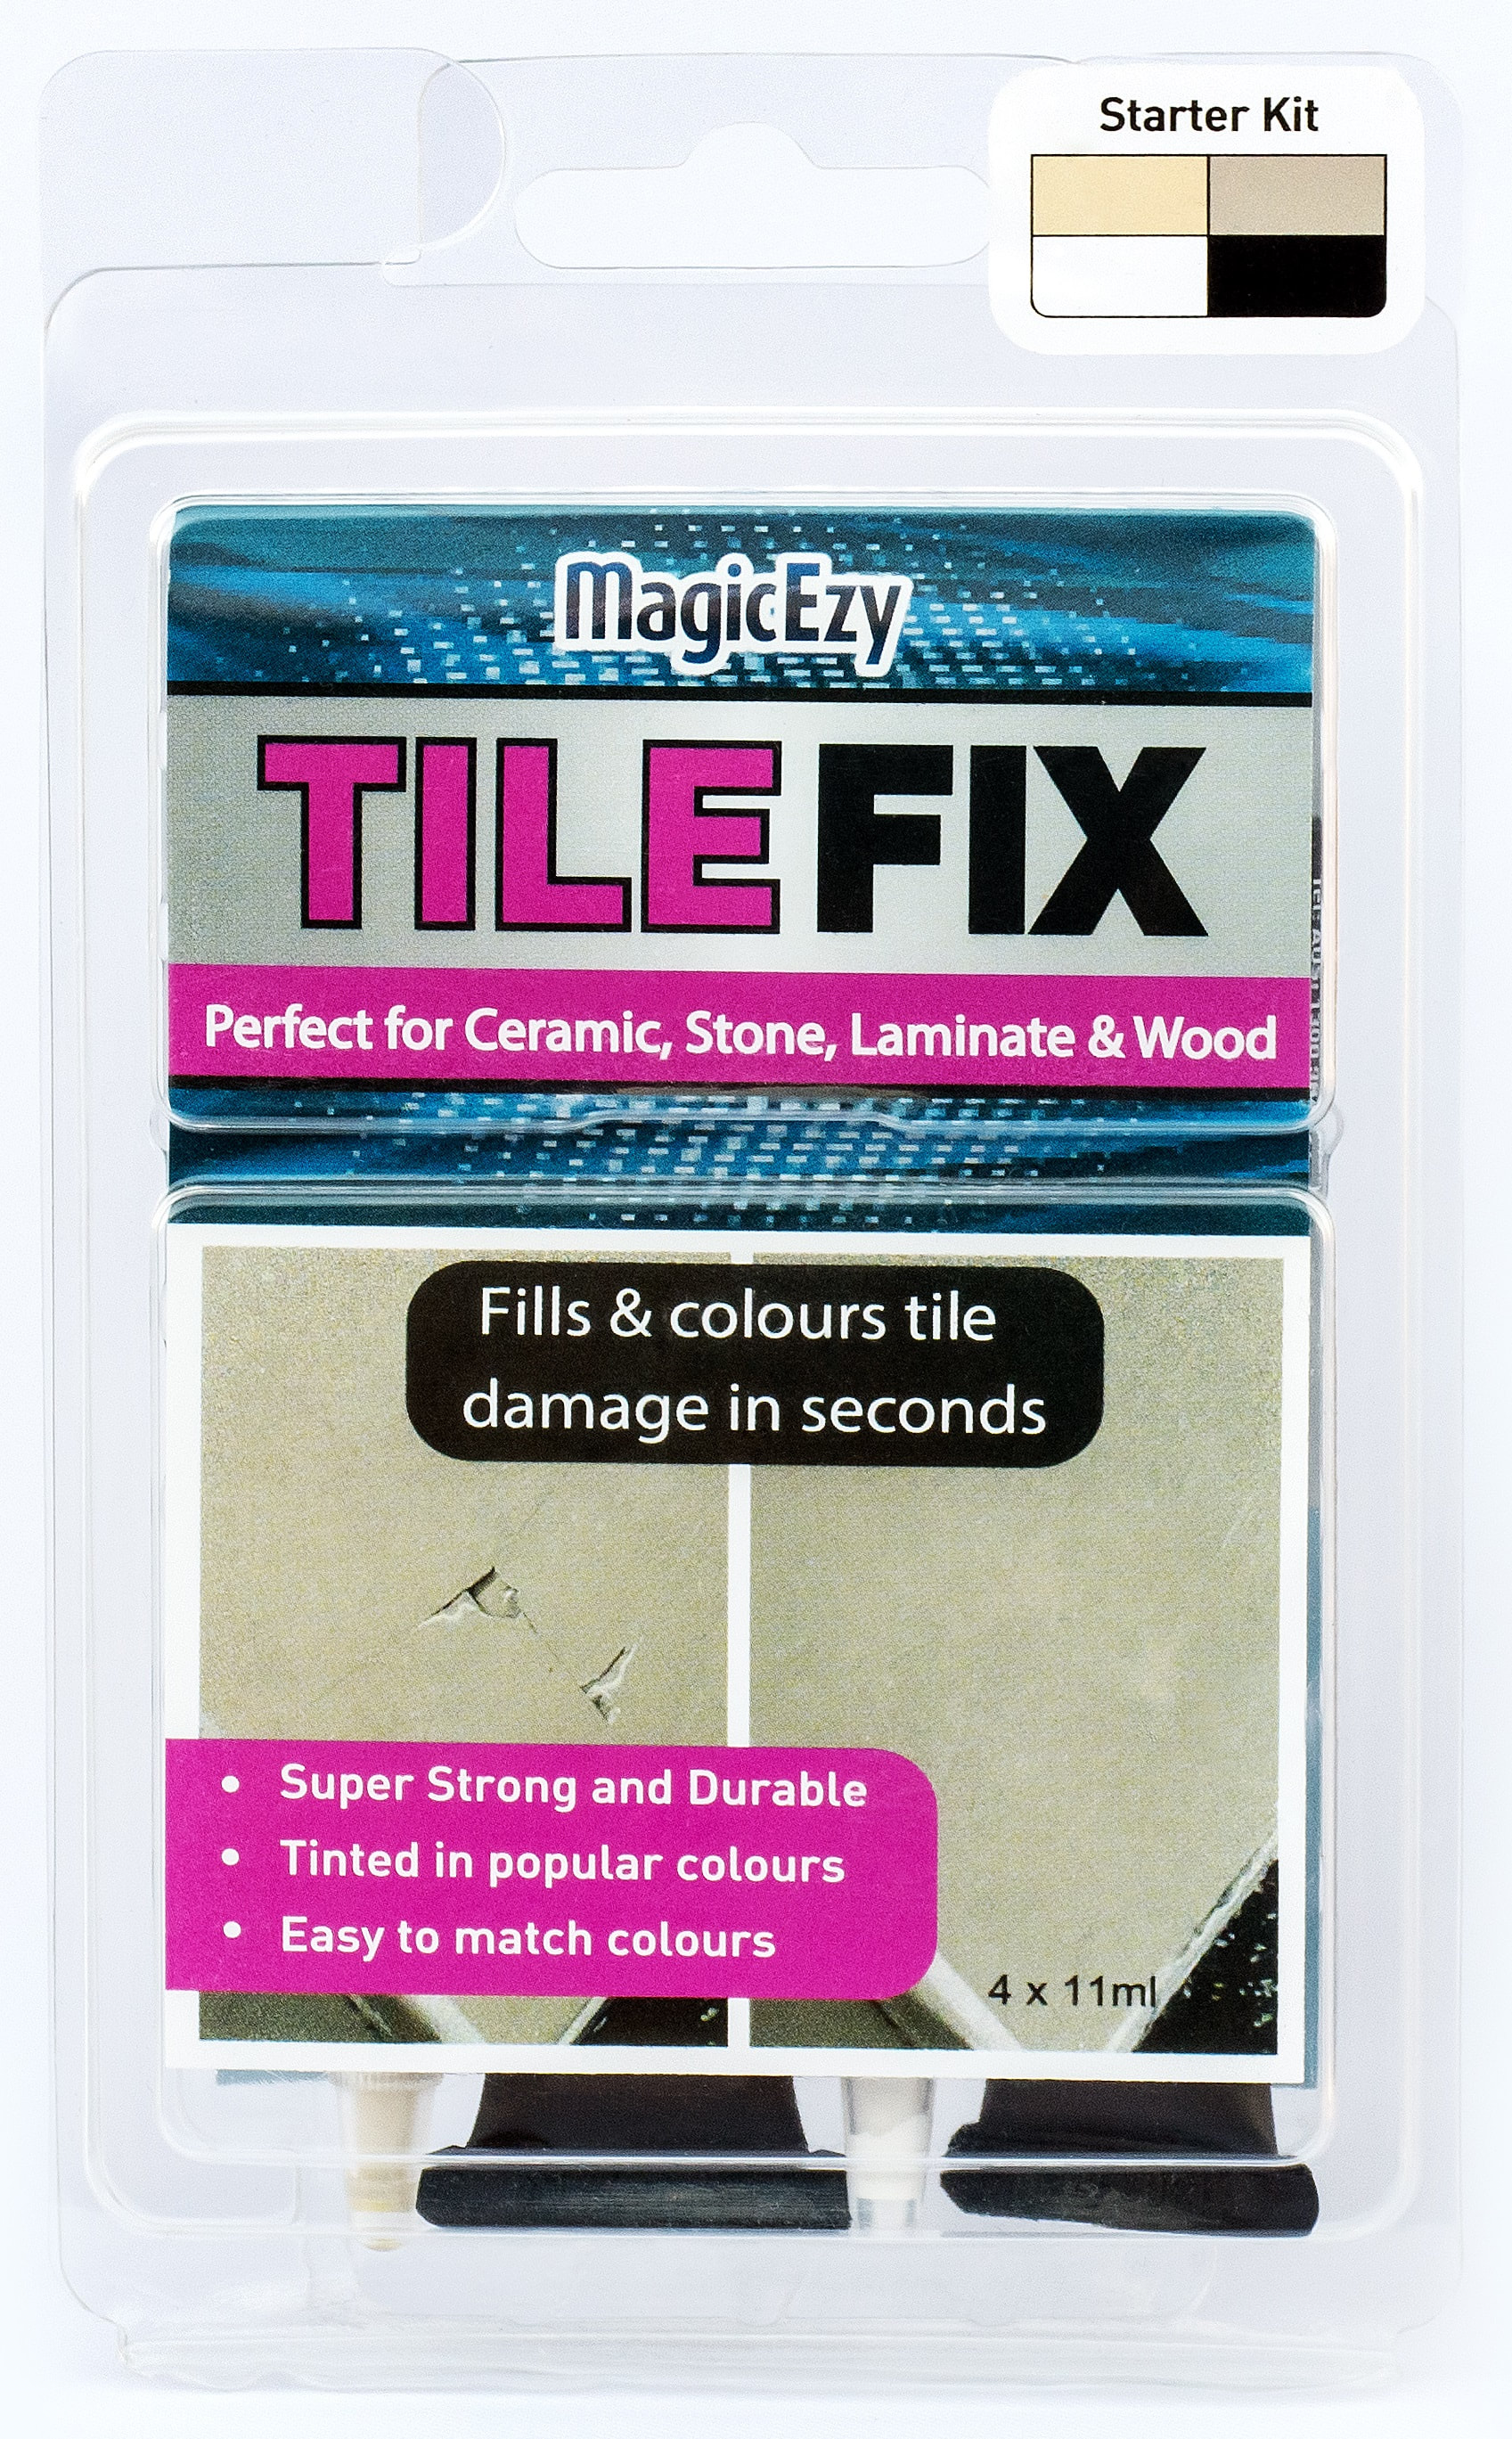 Ceramic and Tile Repair Kit by - Also Works as Bathtub Repair Kit I Ideal  to Fi